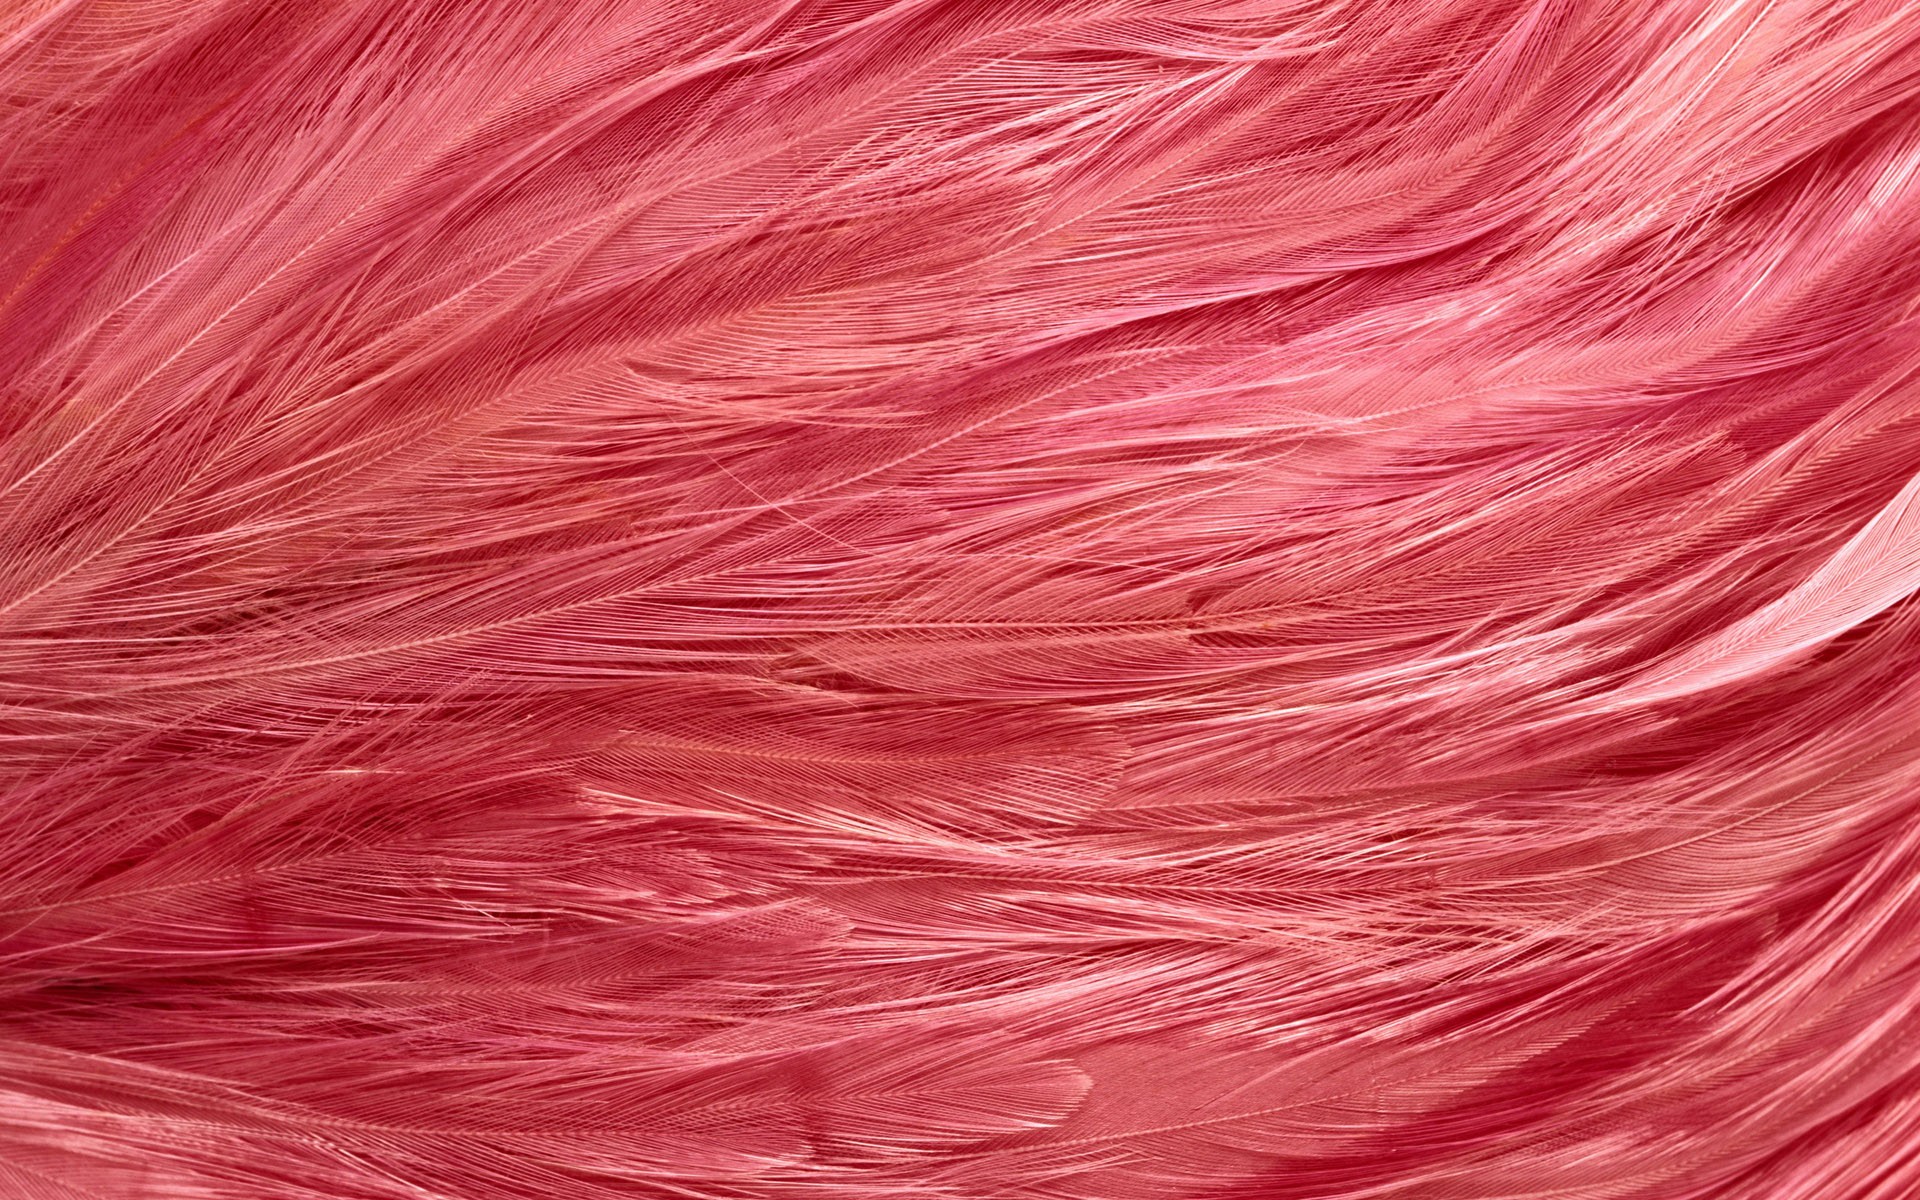 Feathers Wallpaper Pink Myspace Background